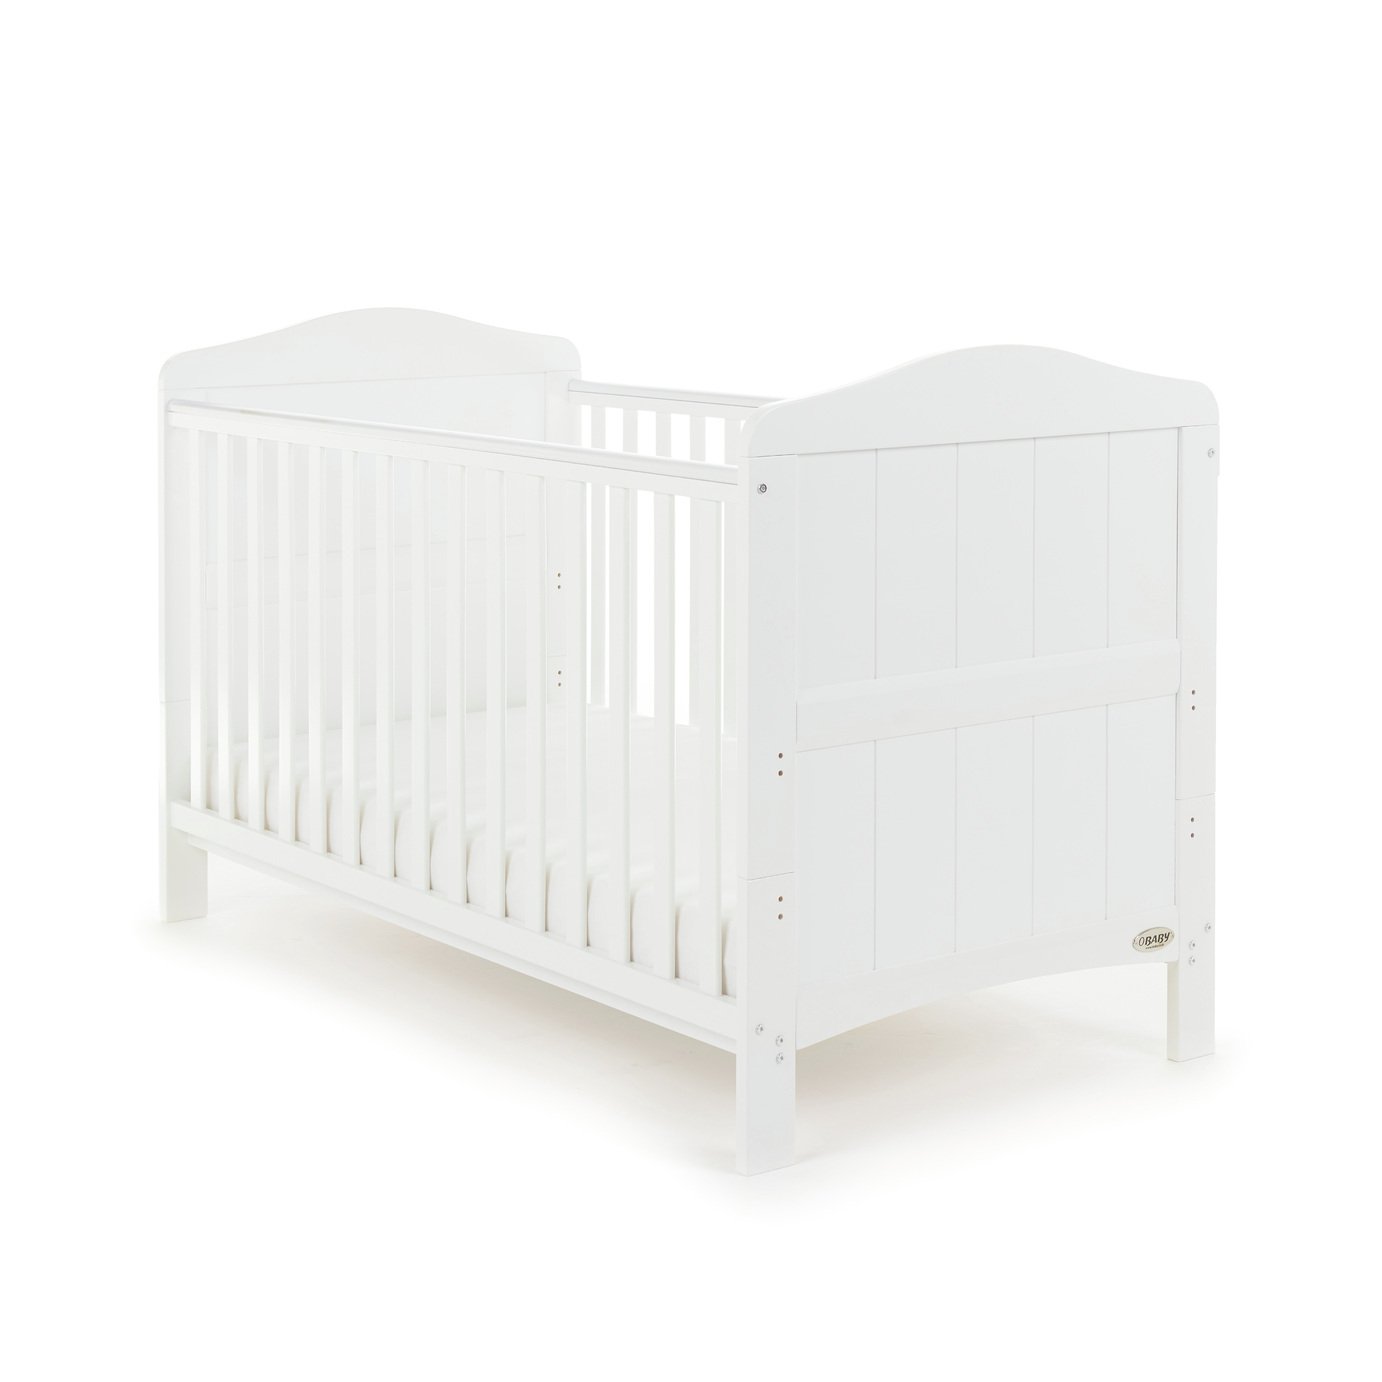 Obaby Whitby Baby Cot Bed and Cot Top Changer Review